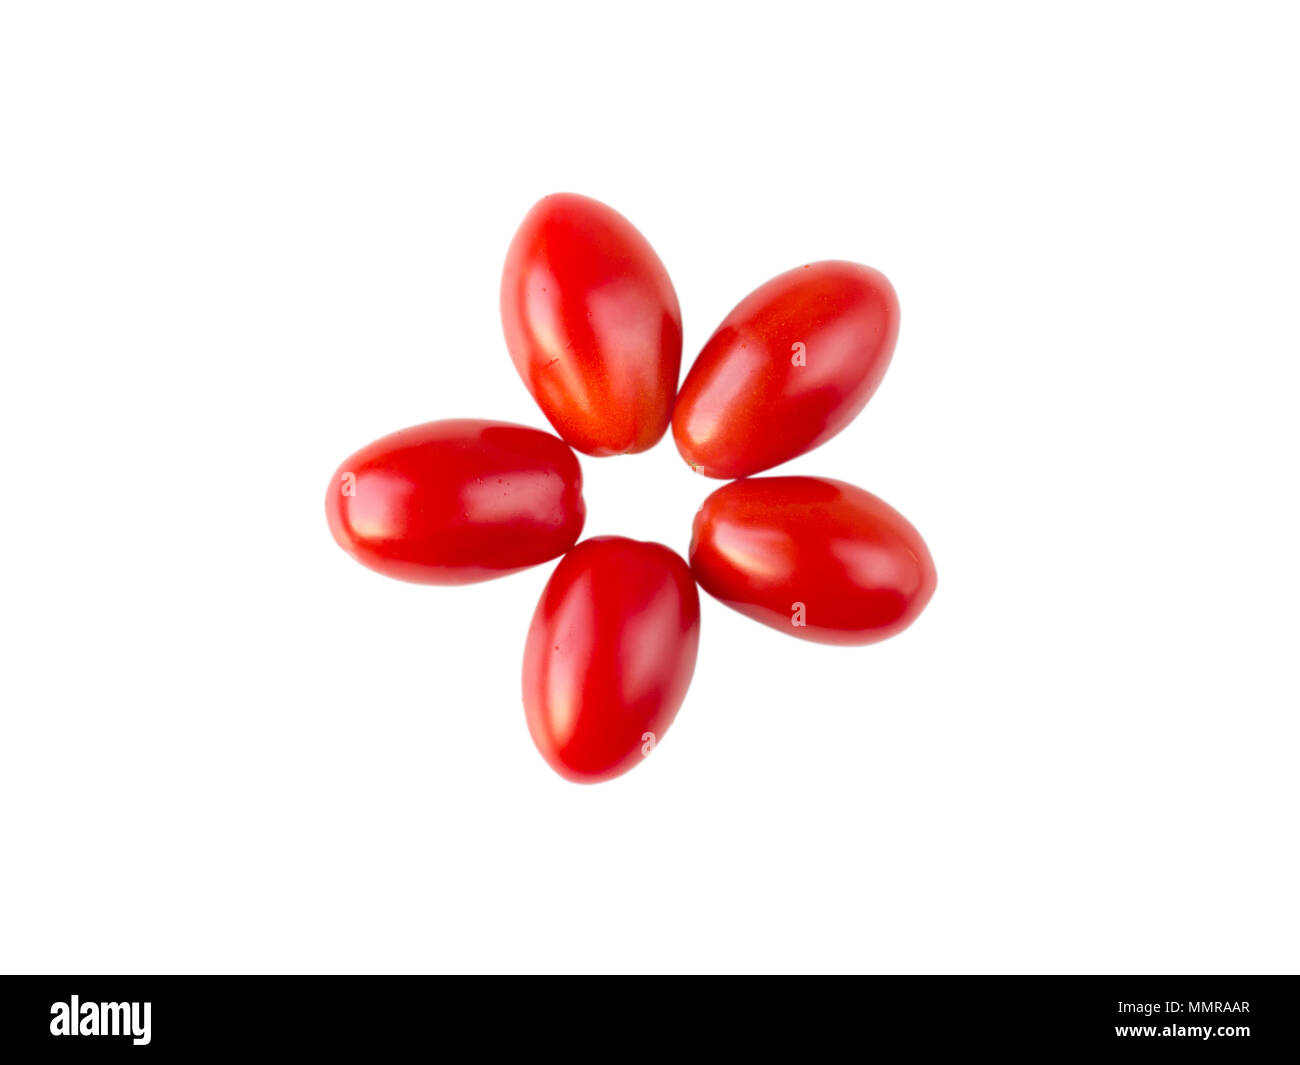 Five pointed star or flower formed by five red plum shaped tomatoes isolated on white flatlay. Vegetable recipe ingredient. Stock Photo